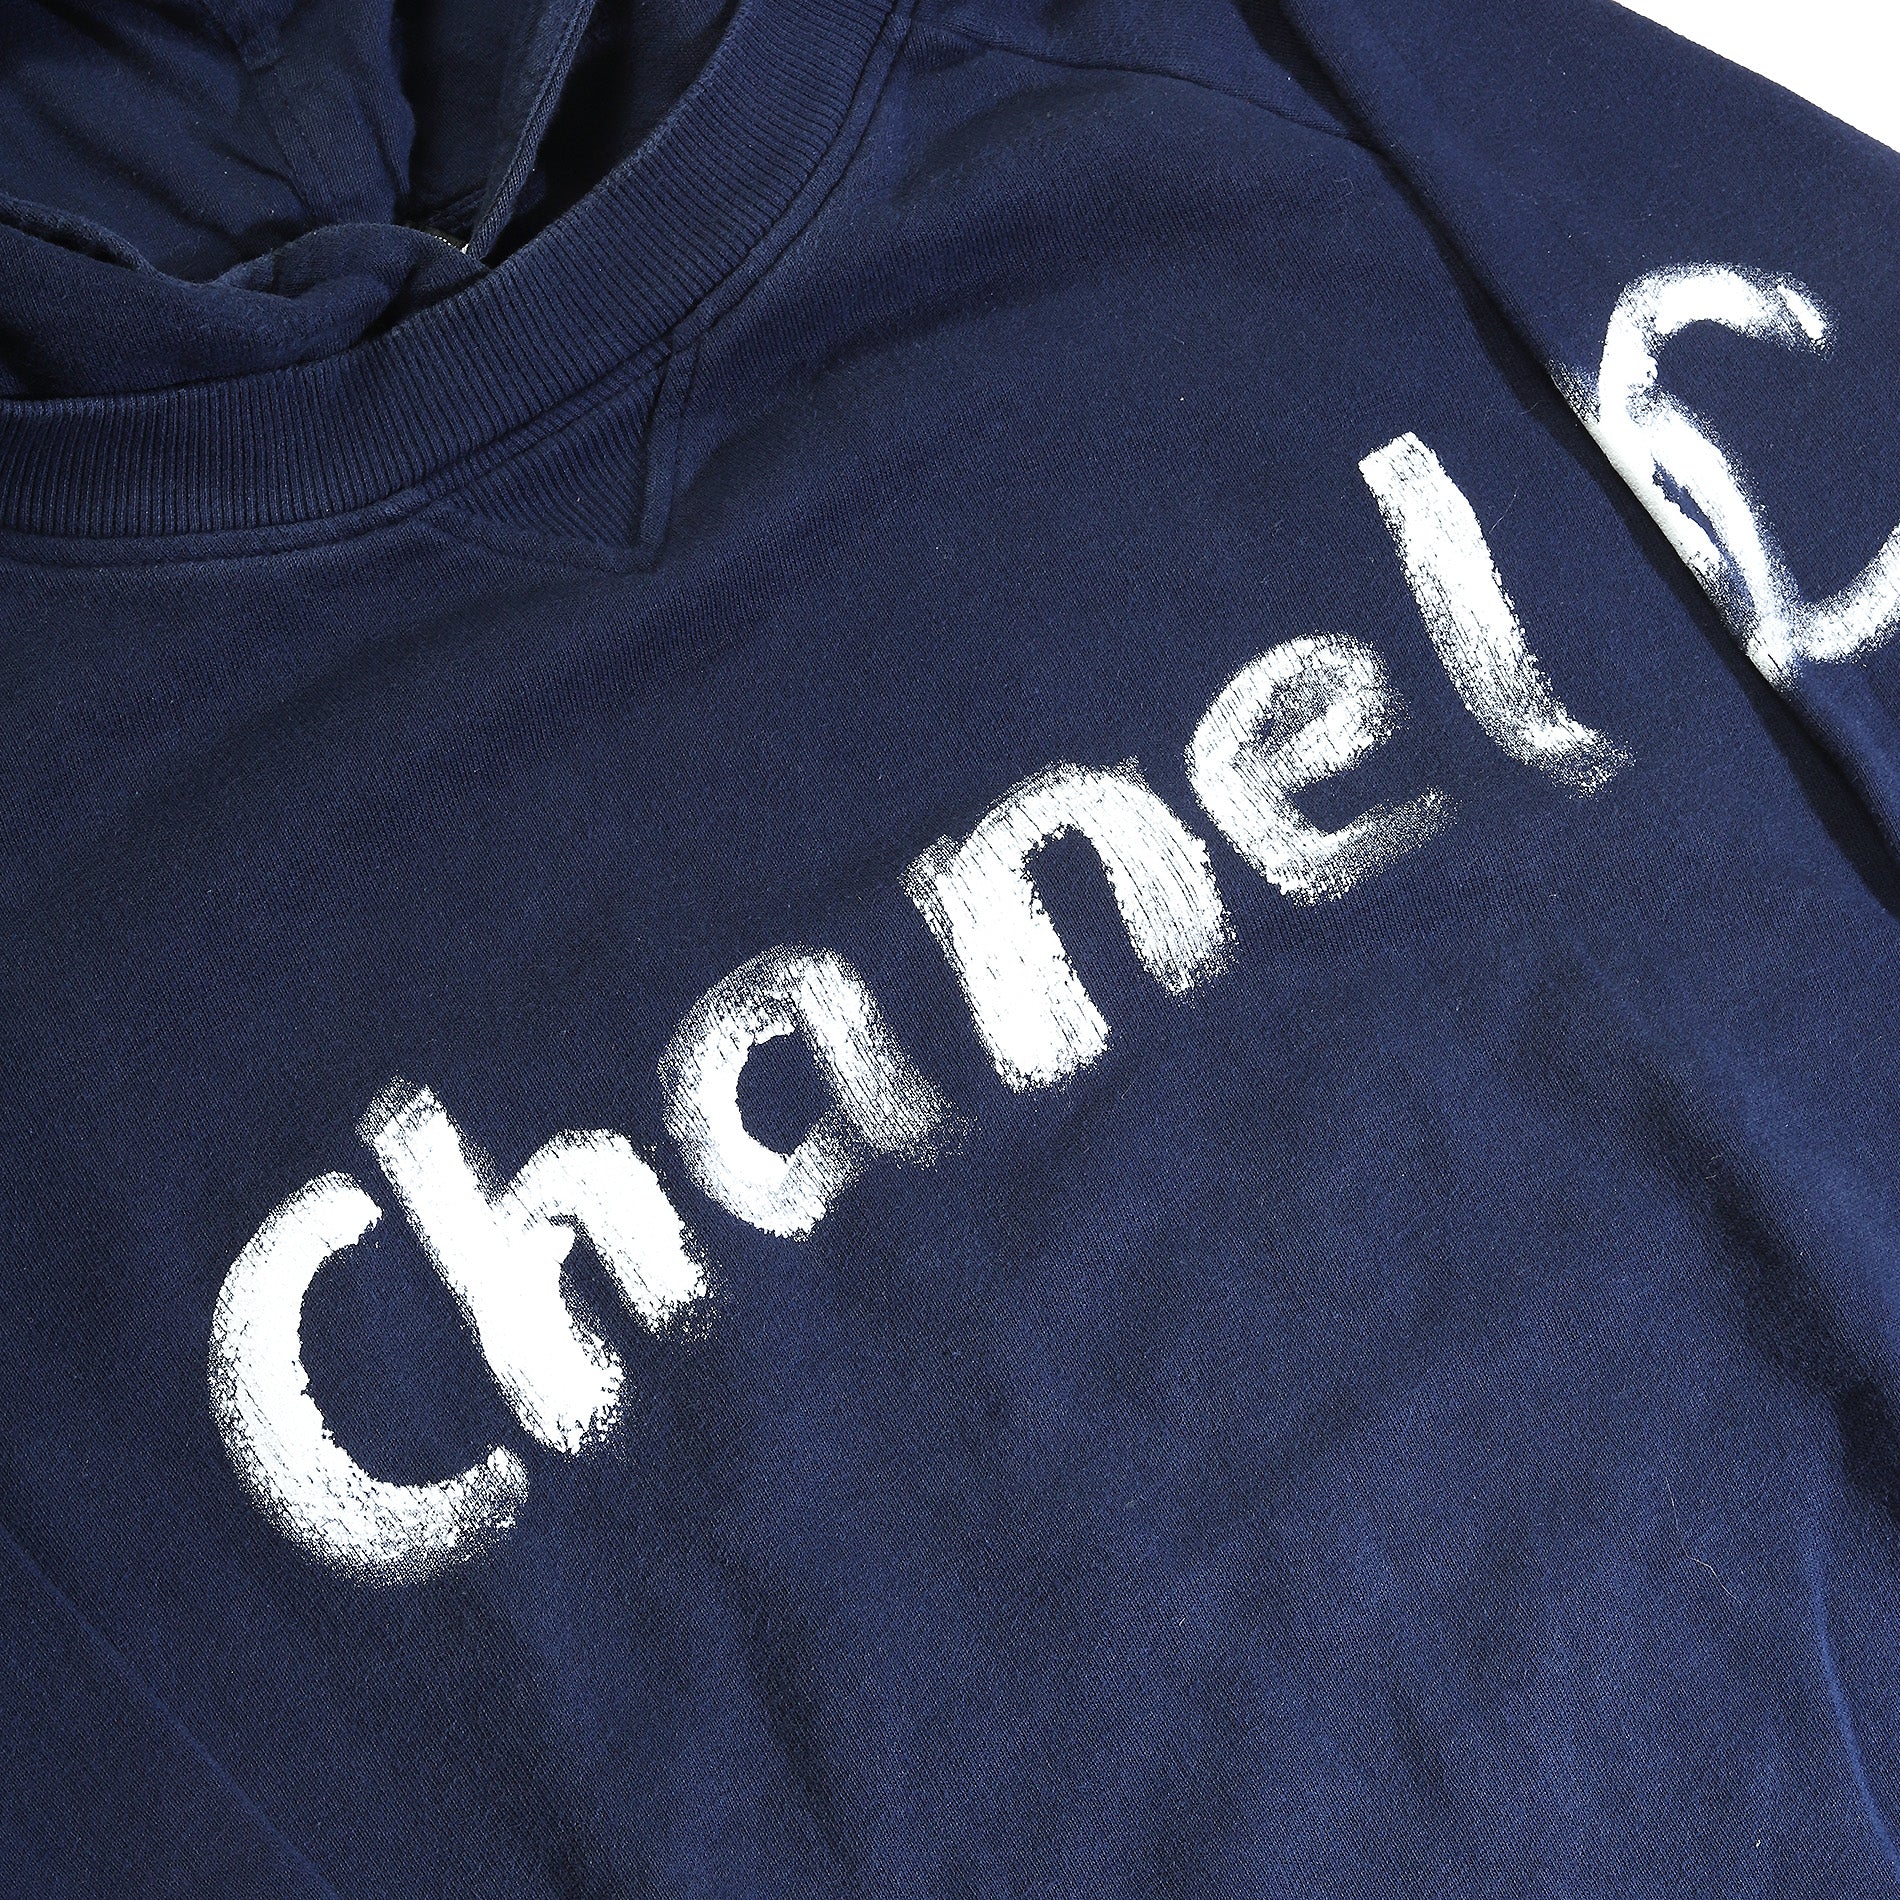 Designer Inspired Hoodie - Coco Chanel at The Honest Dog